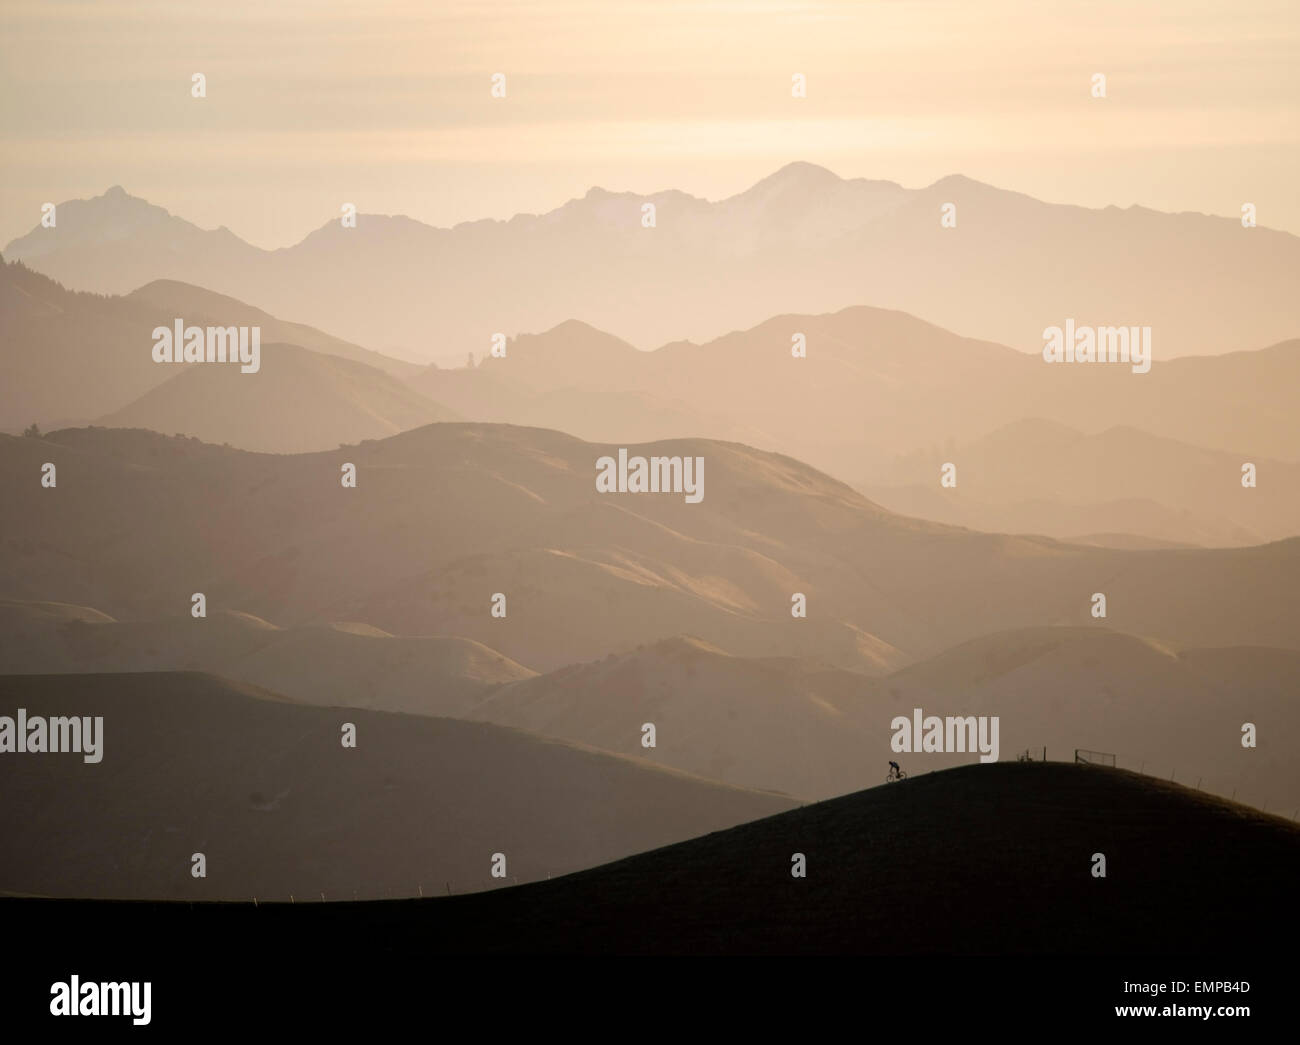 Mountain biker riding a ridge in the Wither Hills with the Blairich Range beyond. Marlborough, New Zealand. Stock Photo